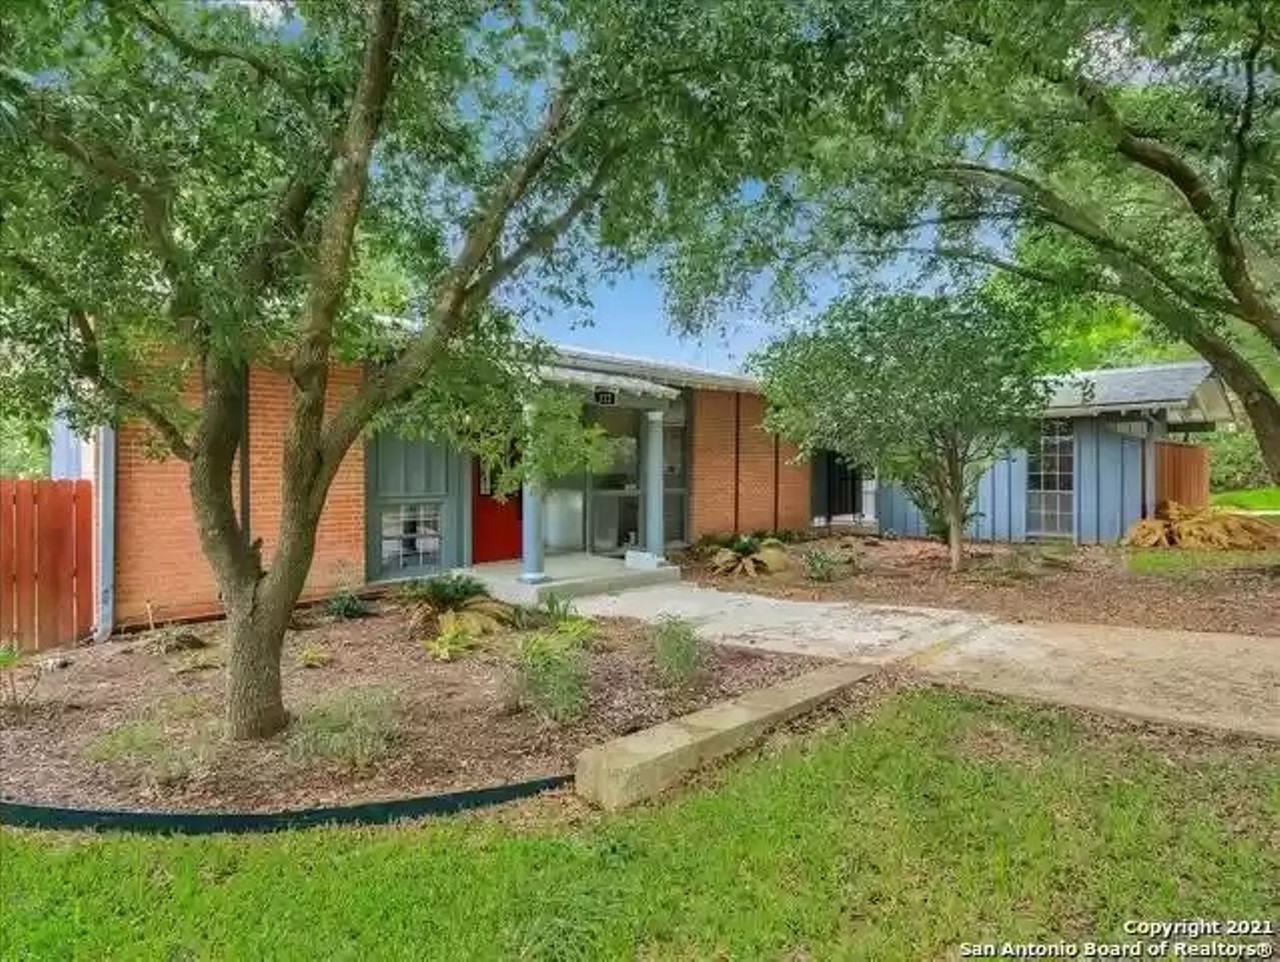 This wild mid-century home for sale in San Antonio was designed by a developer of missile silos